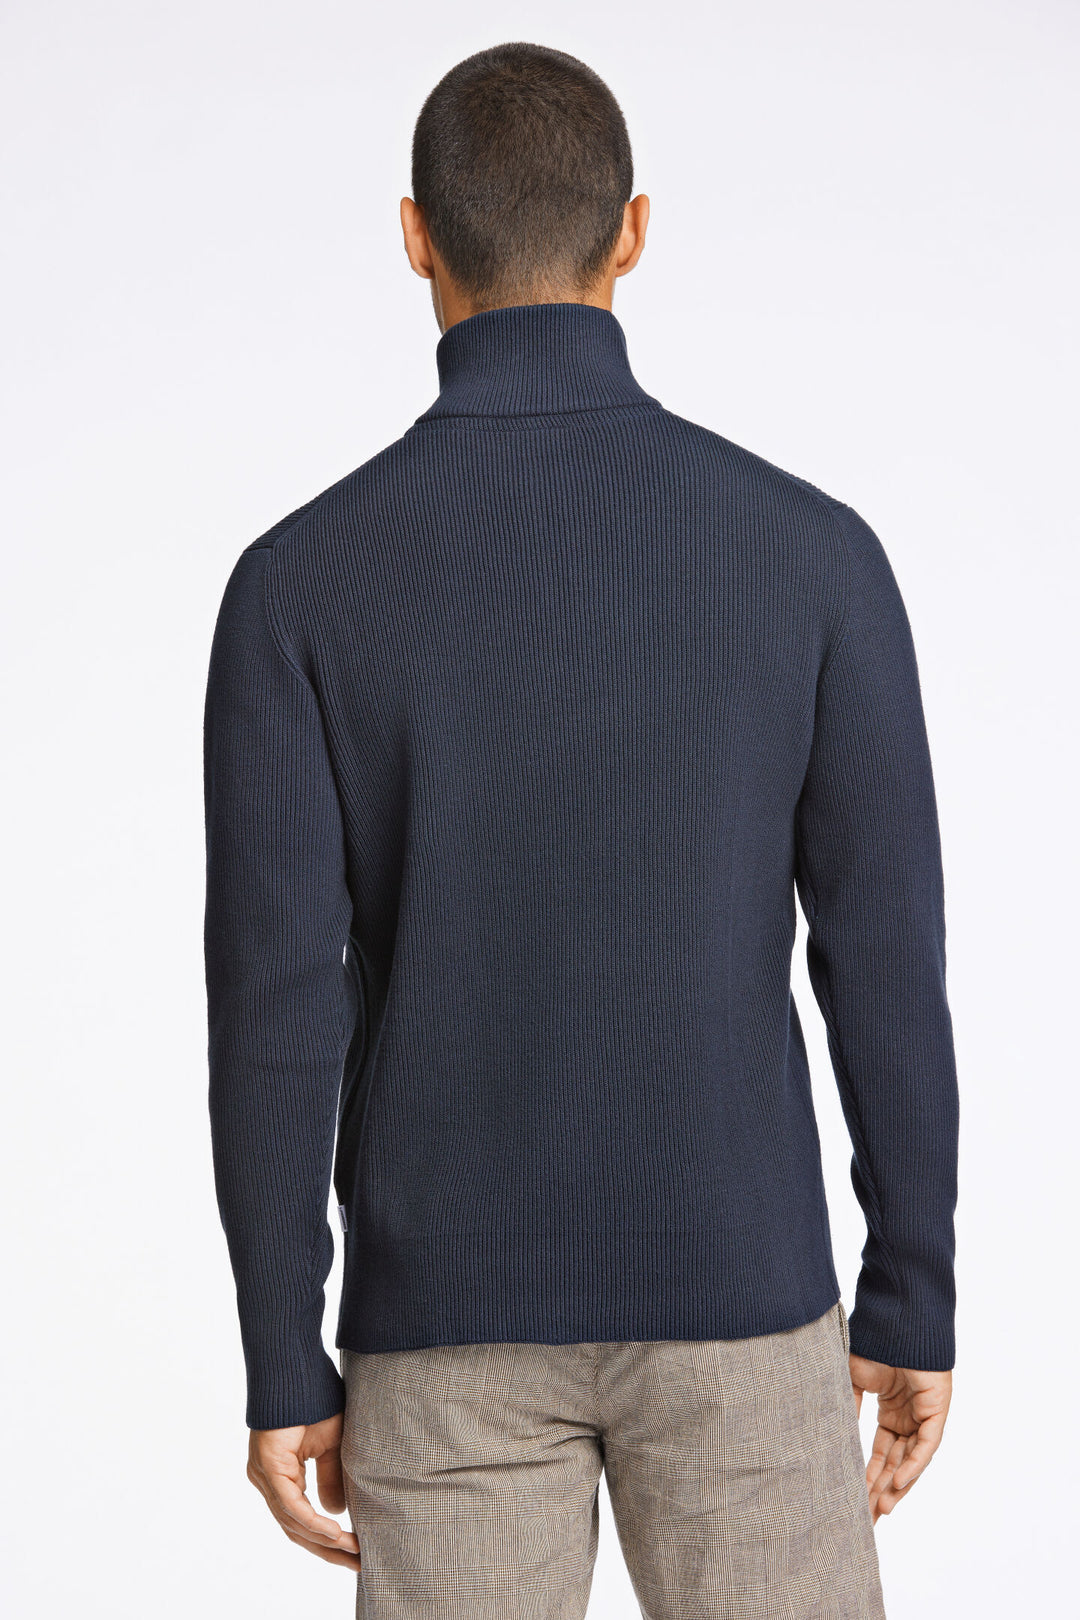 Half-zip Relaxed Fit Navy